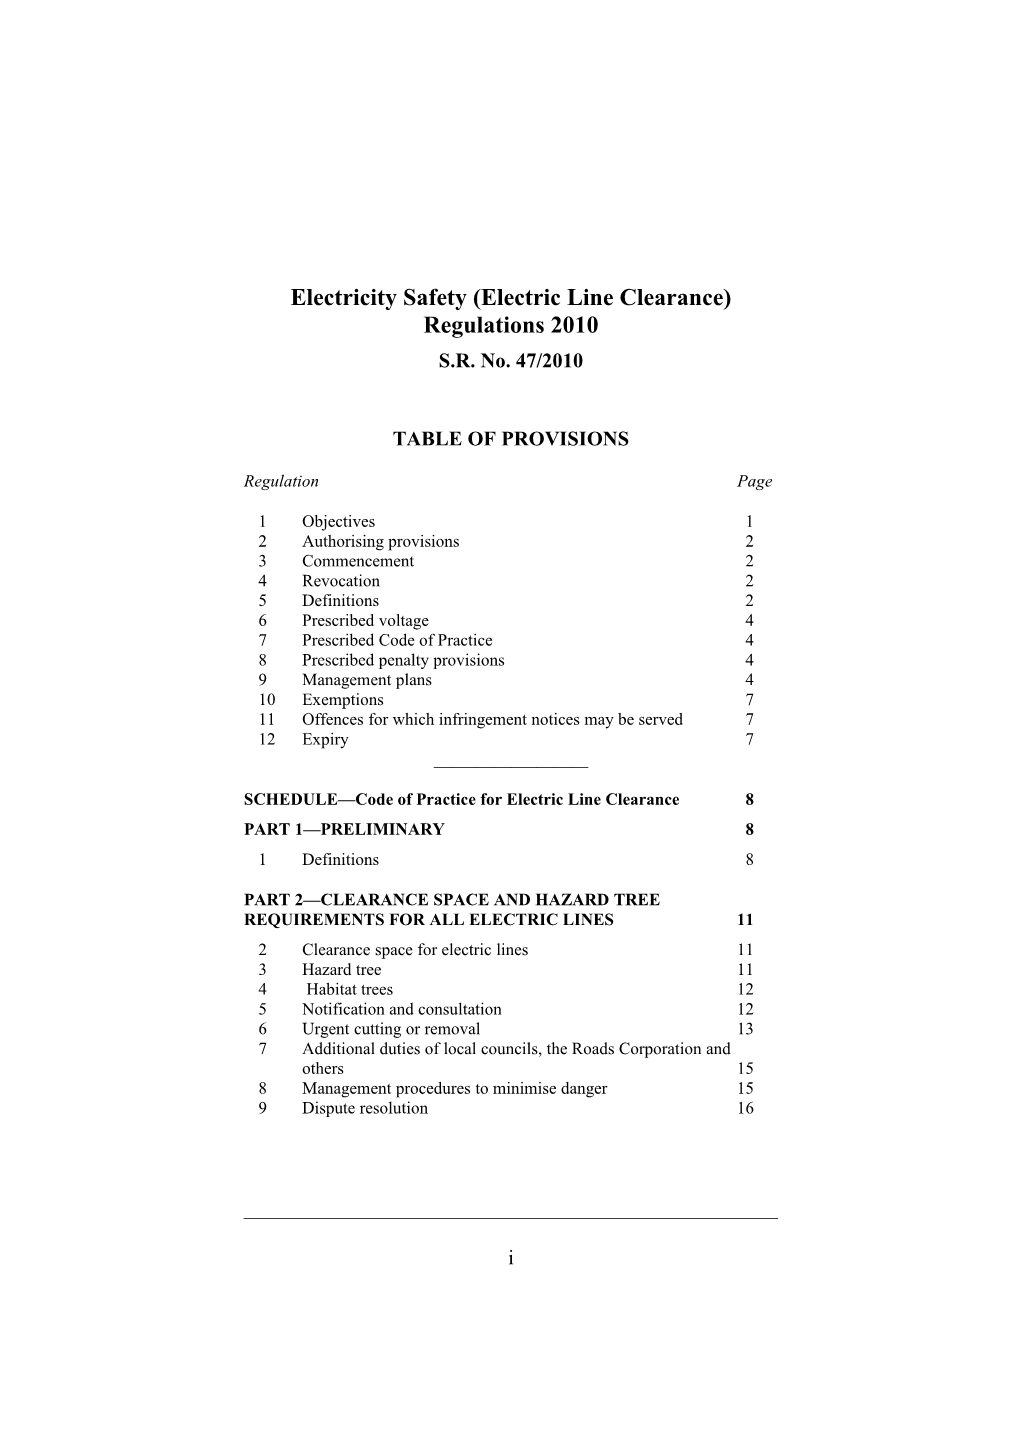 Electricity Safety (Electric Line Clearance) Regulations 2010